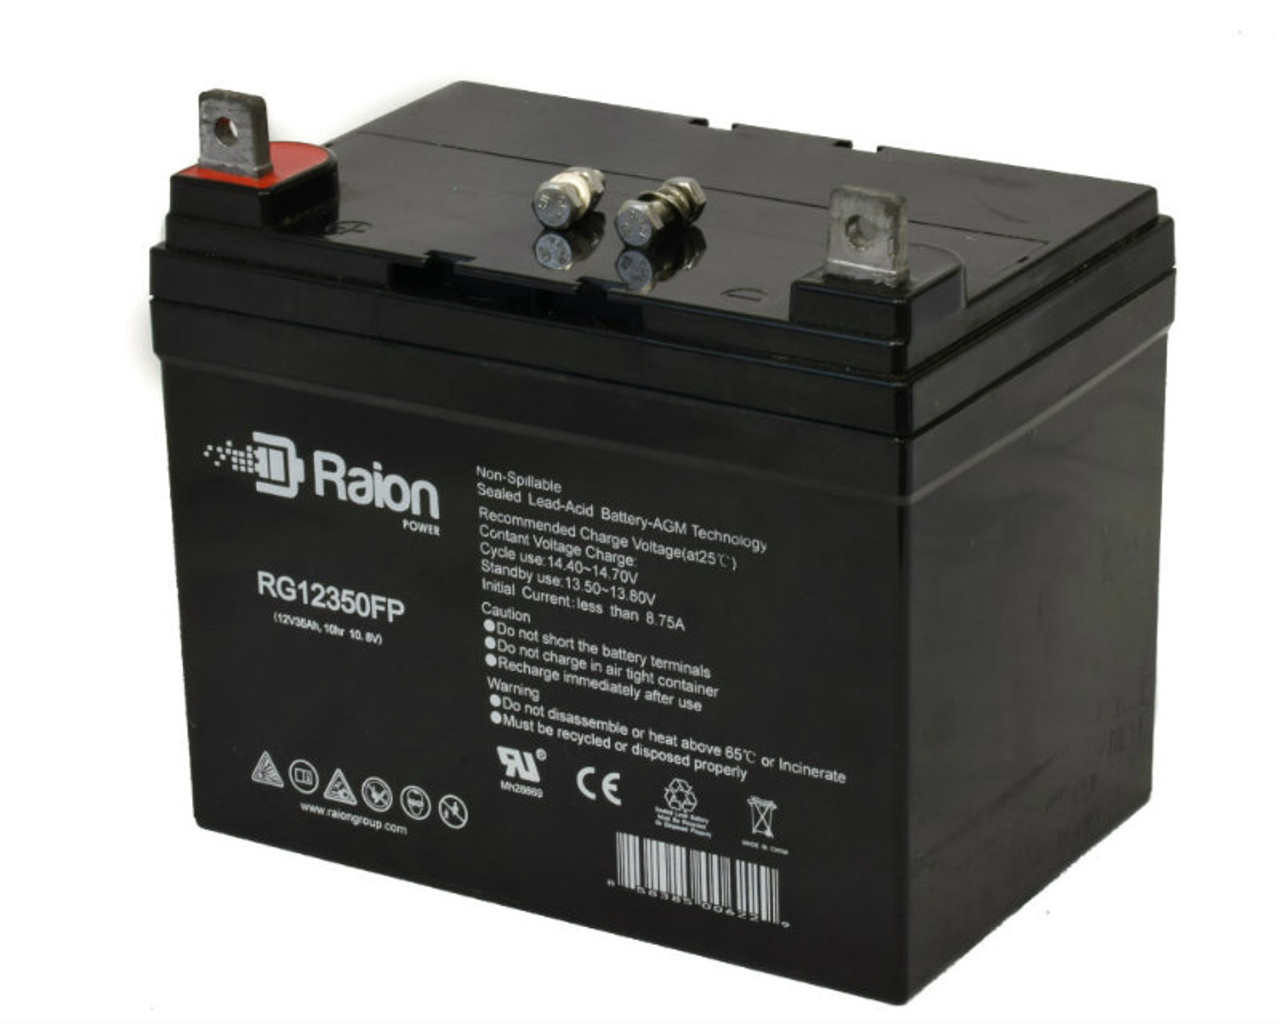 Raion Power Replacement 12V 35Ah RG12350FP Mobility Scooter Battery for Electric Mobility Rascal 329LE Candy Apple